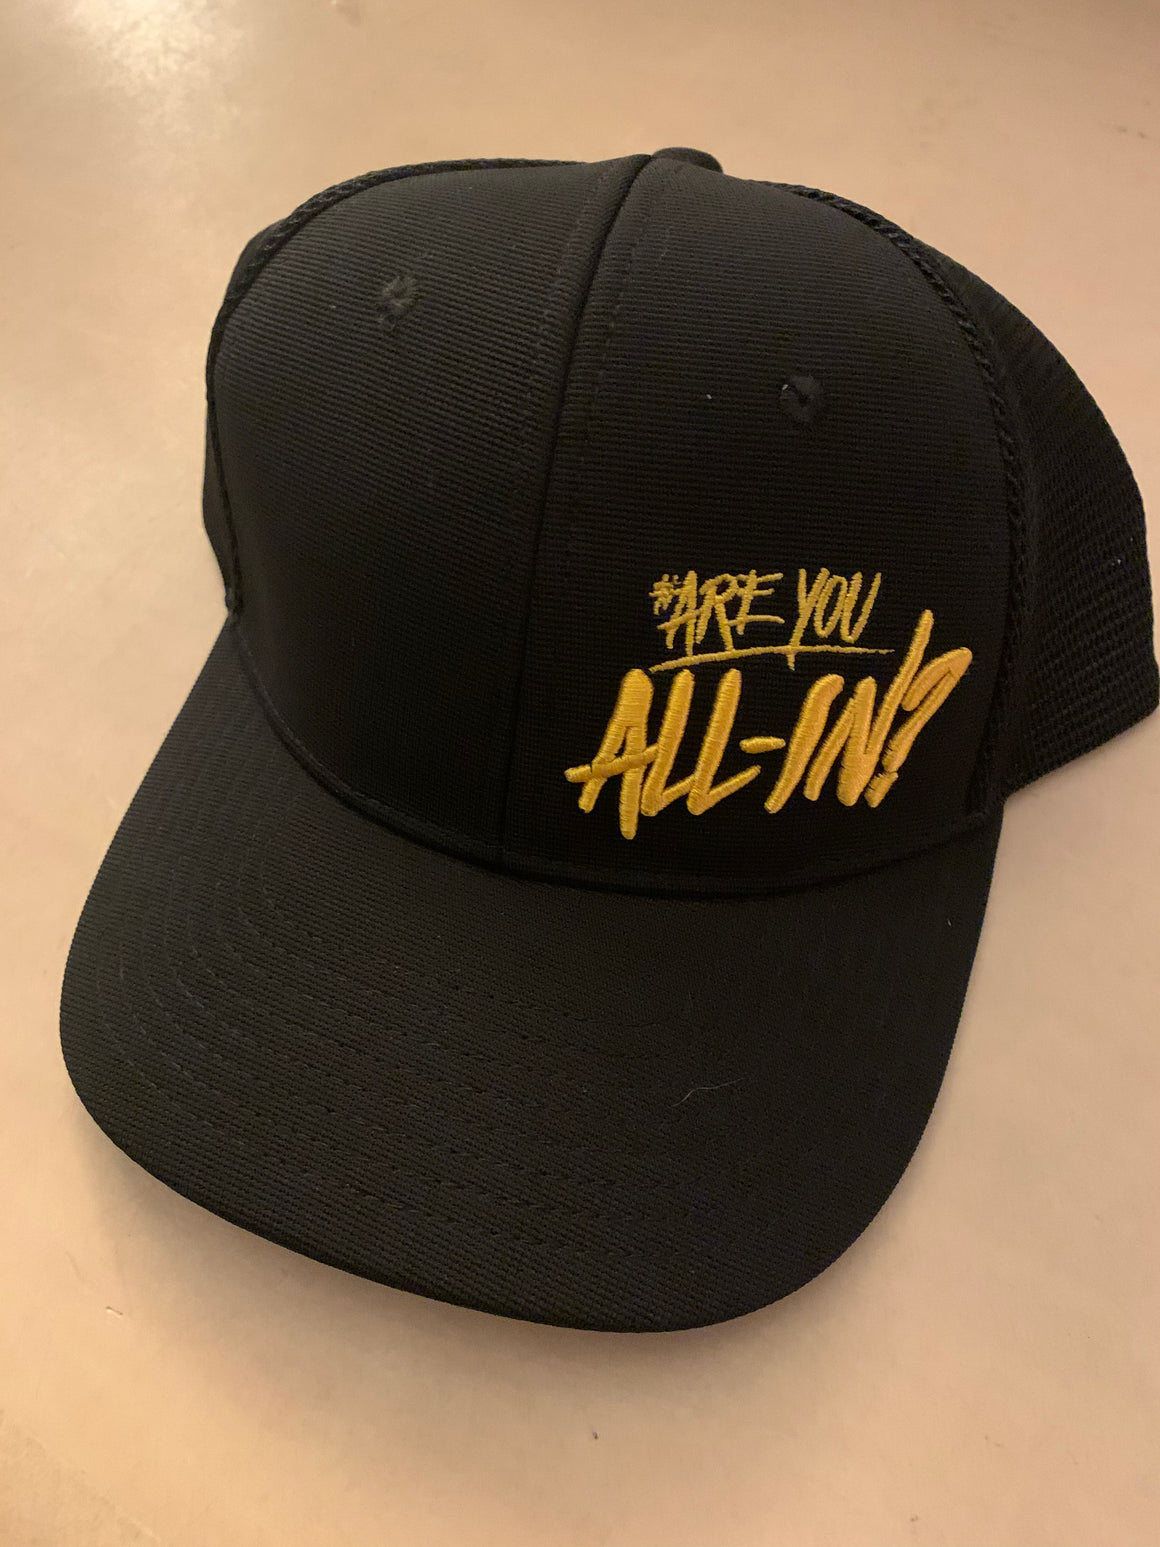 Mutant (#Are You All-In?) Snapback Cap